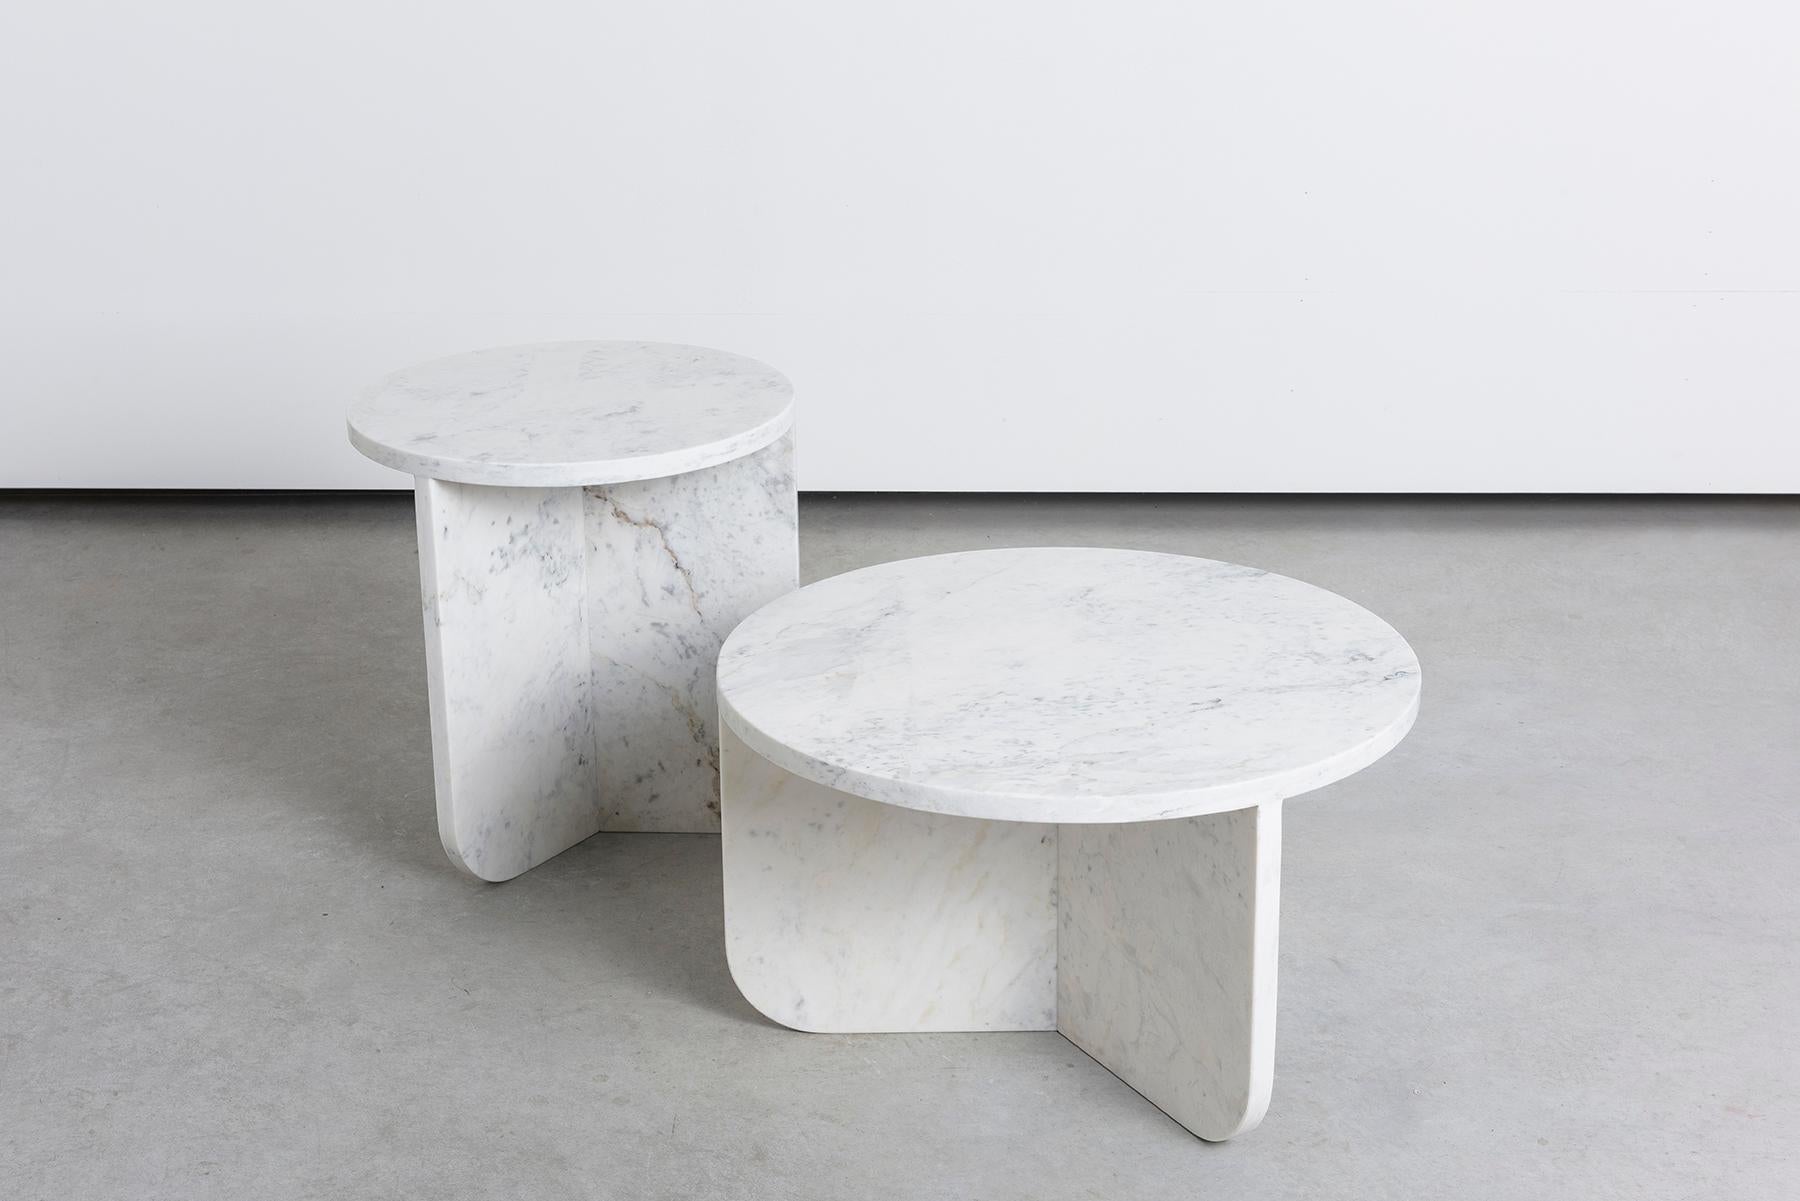 Brazilian Leme Table, Low, by RAIN, Contemporary Side Table, White Matarazzo Marble For Sale